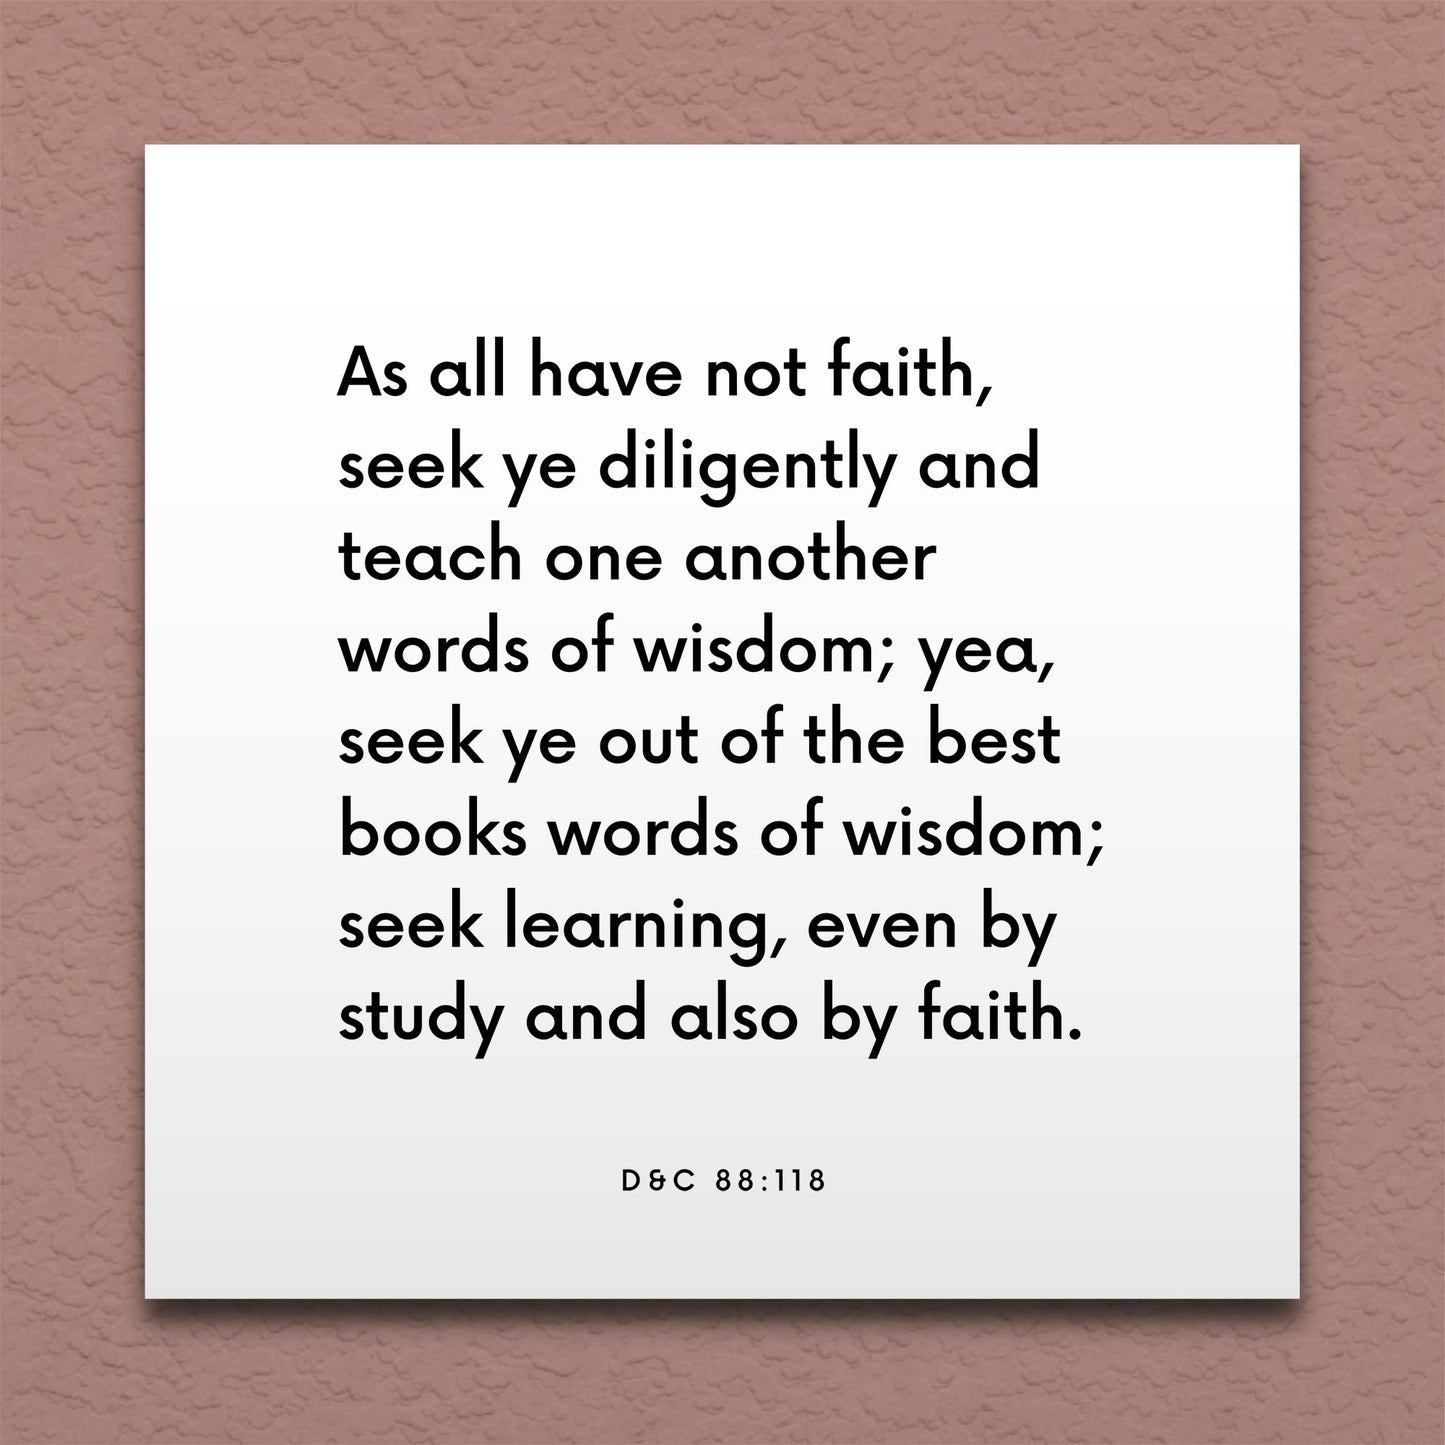 Wall-mounted scripture tile for D&C 88:118 - "Seek learning, even by study and also by faith"